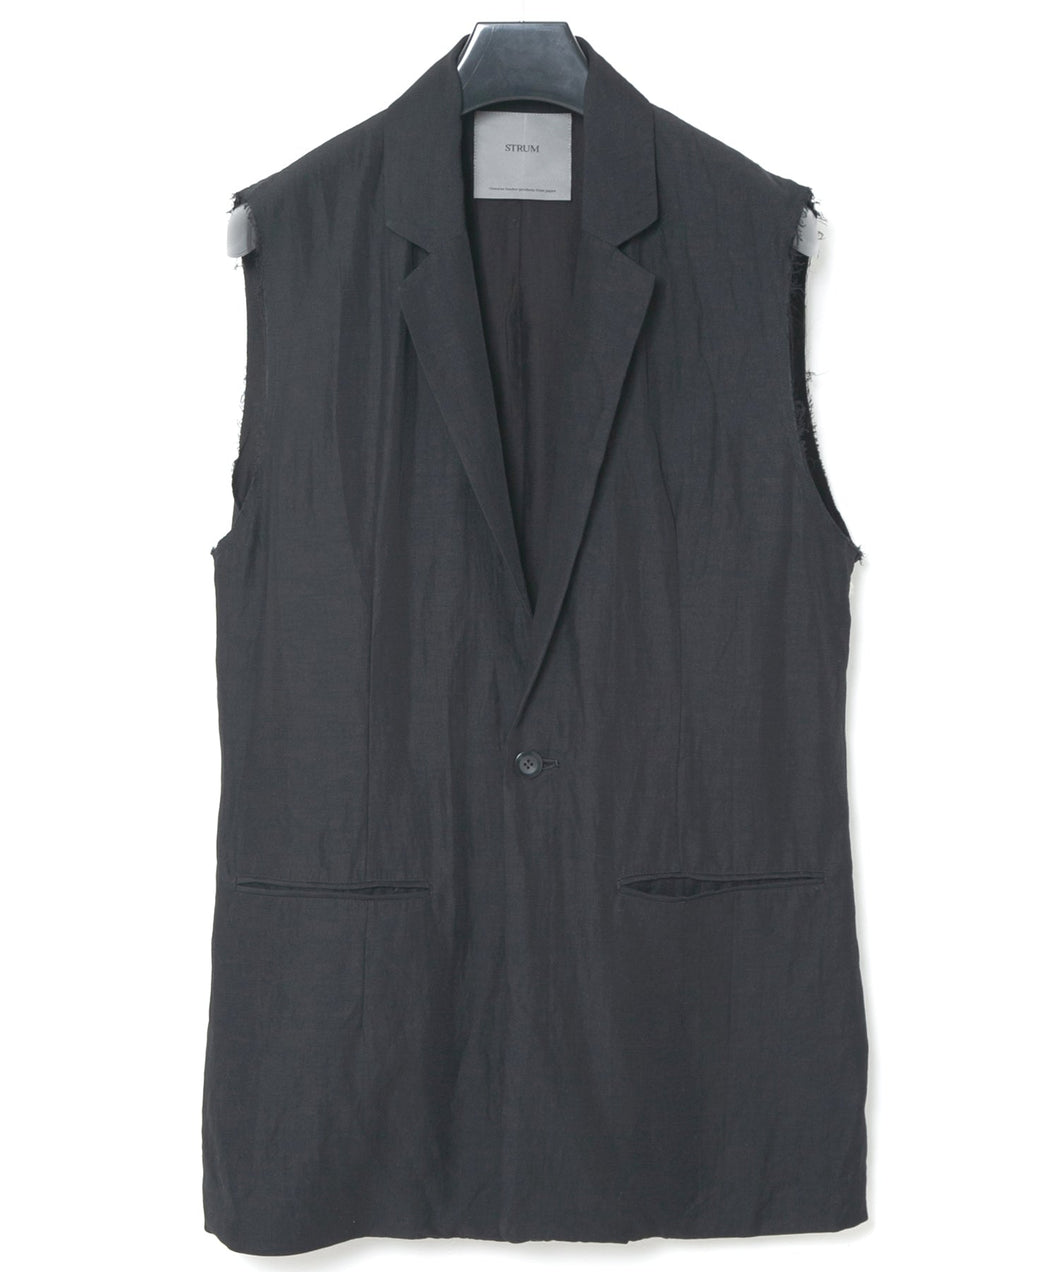 Washer Dyed Rayon&Linen Cloth Tailored Vest - BLACK